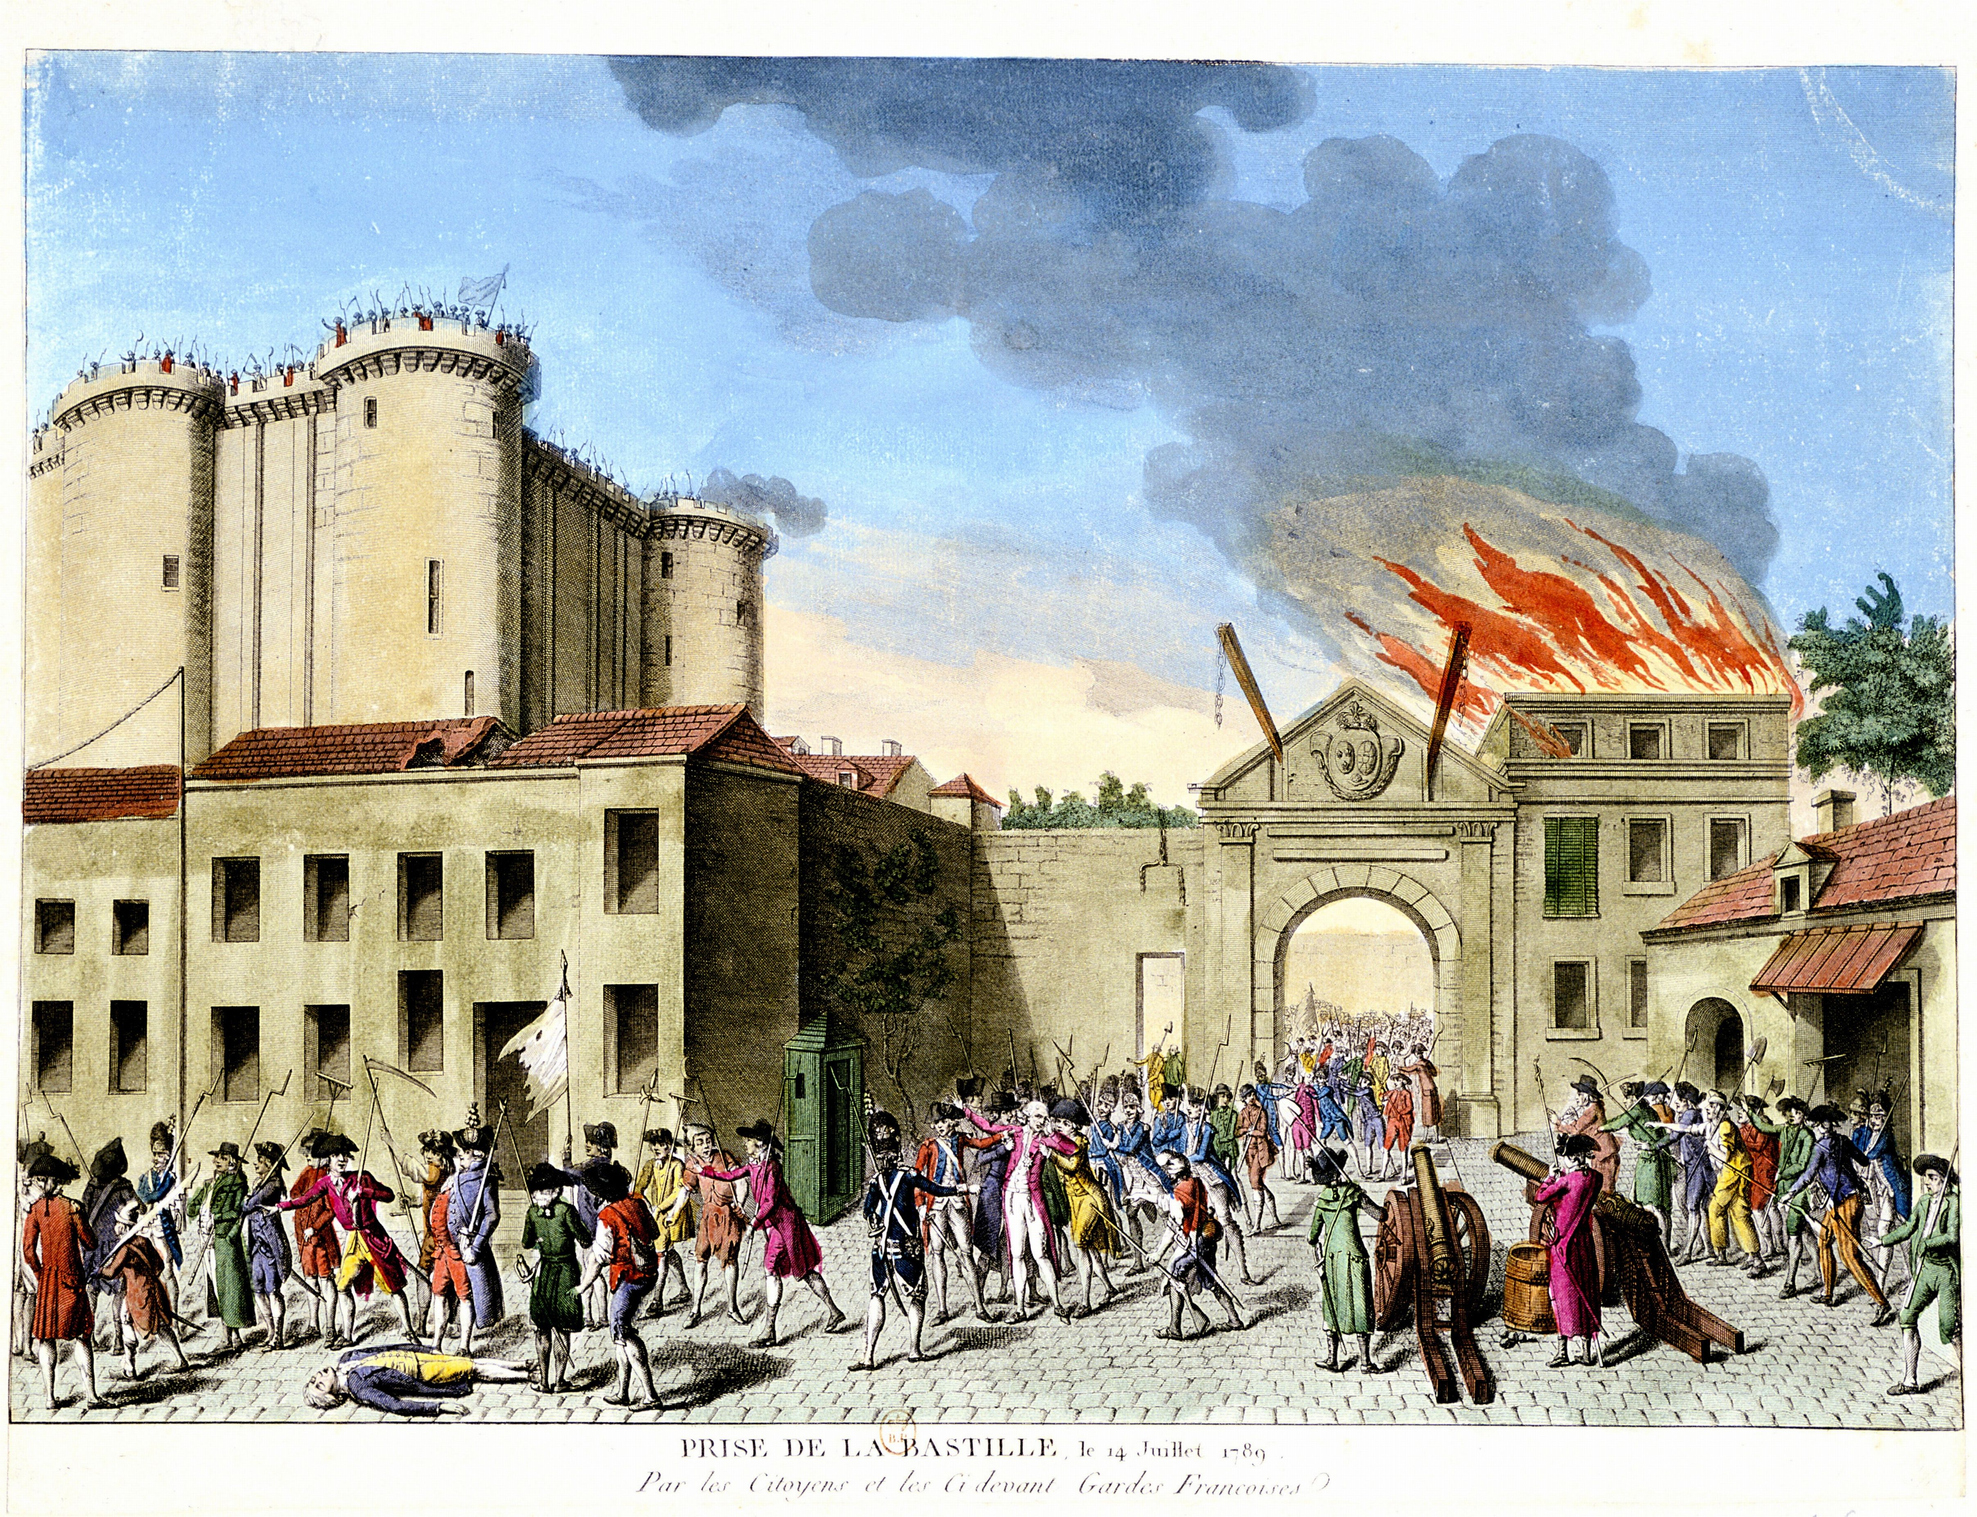 More than 200 years later, historians are still gleaning some unexpected insights on inflation from the French Revolution. Louis Rouanet, Ph.D., assistant professor in the College of Business, is the lead author of the new study on the politics and dynamics of hyperinflation in revolutionary France, drawing relevant lessons for today.  